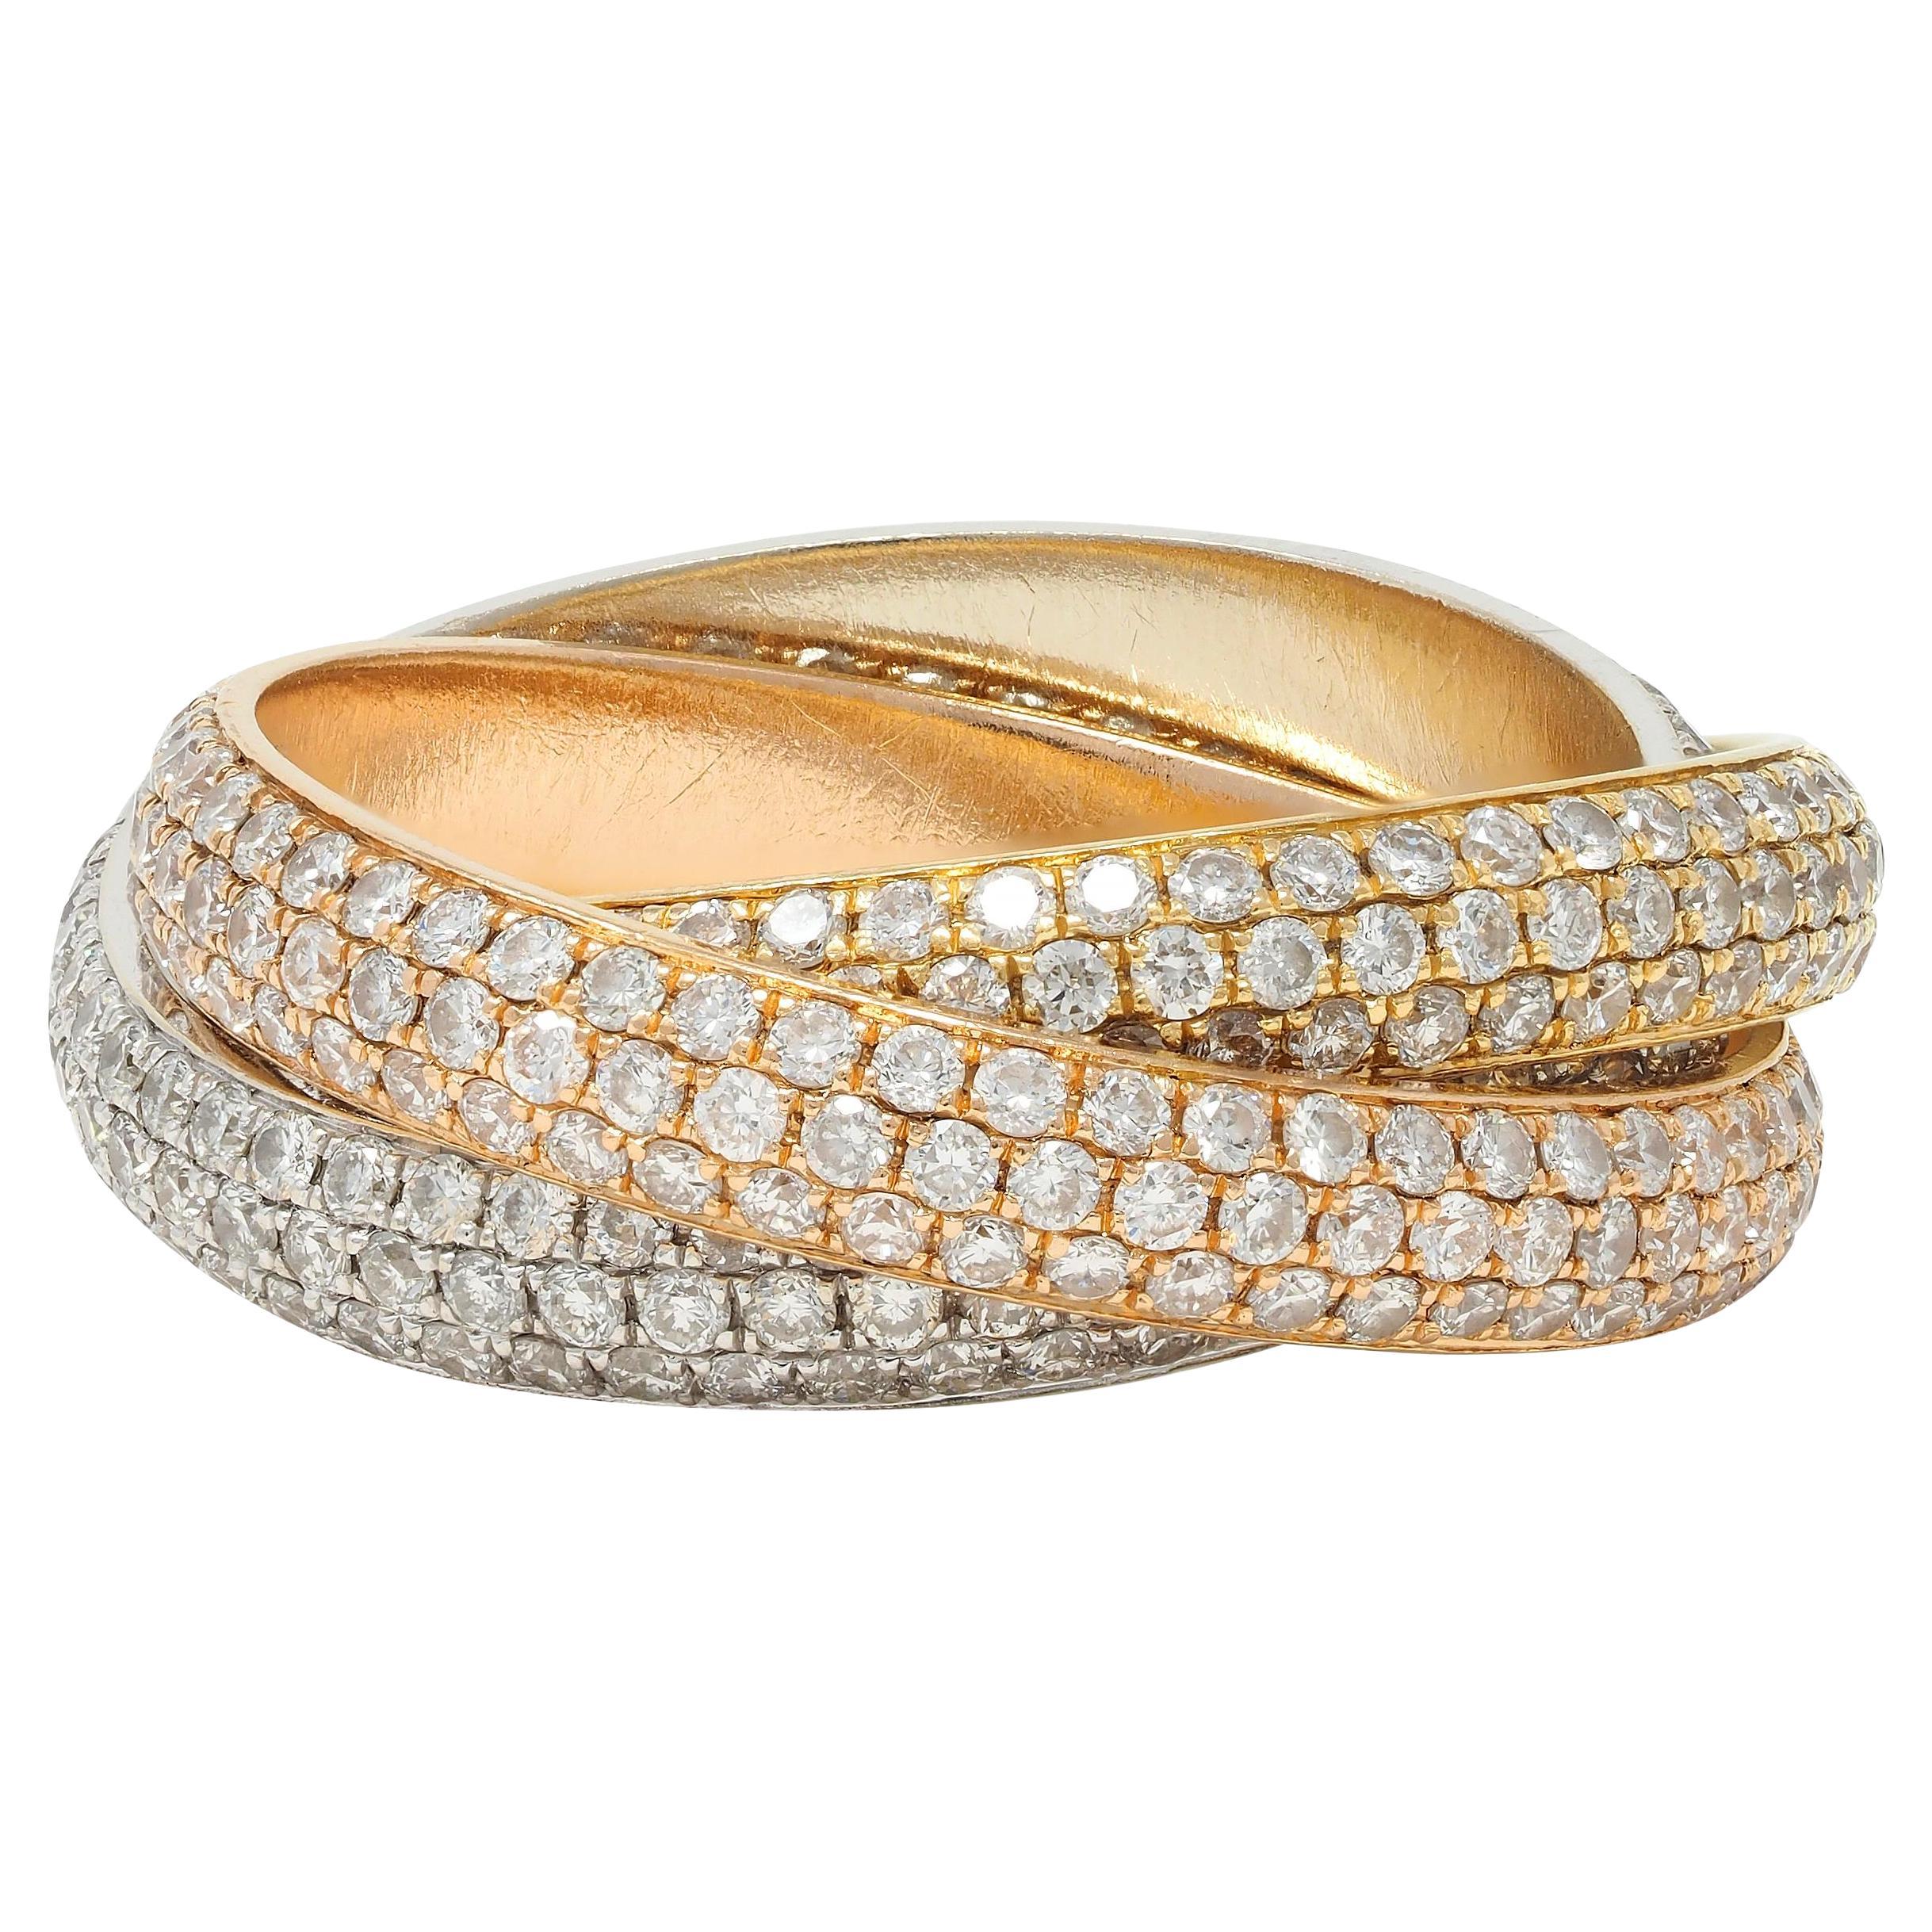 Cartier 4.50 CTW Diamond 18 Karat Tri-Colored Gold Rolling Trinity Band Ring For Sale